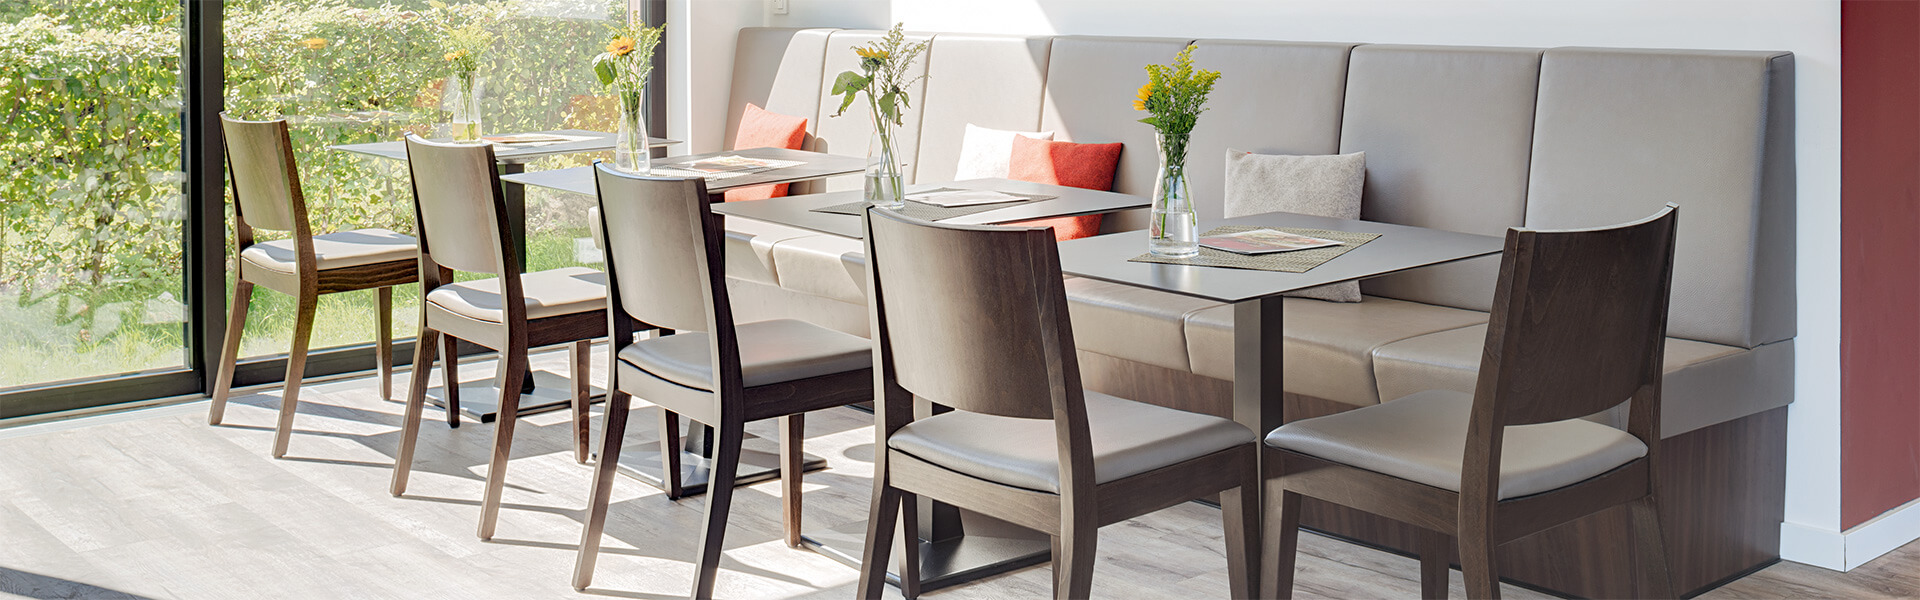 Café furniture and bistro furniture with a casual flair